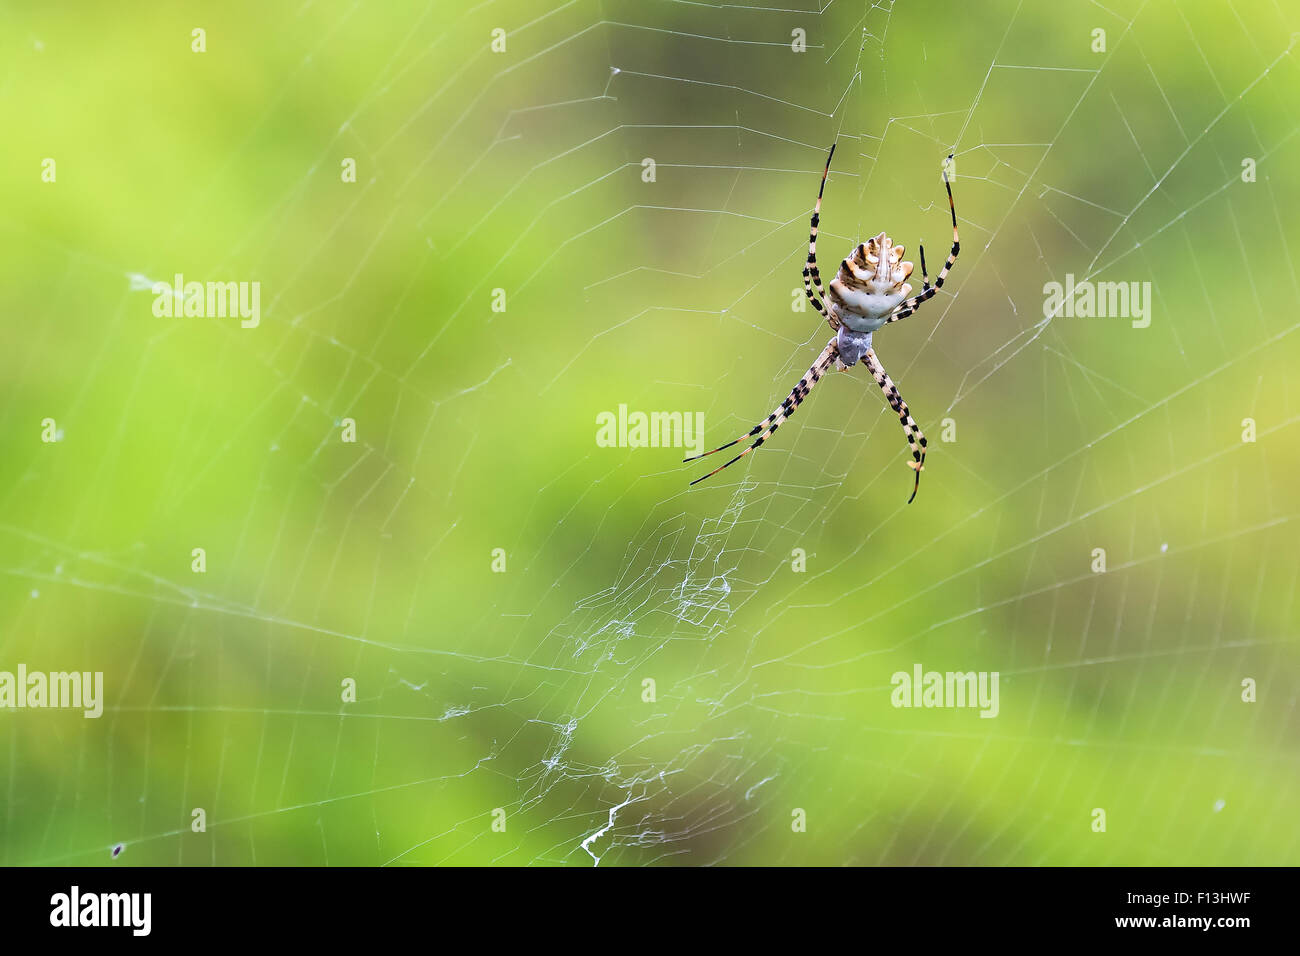 Spider on the web. Stock Photo